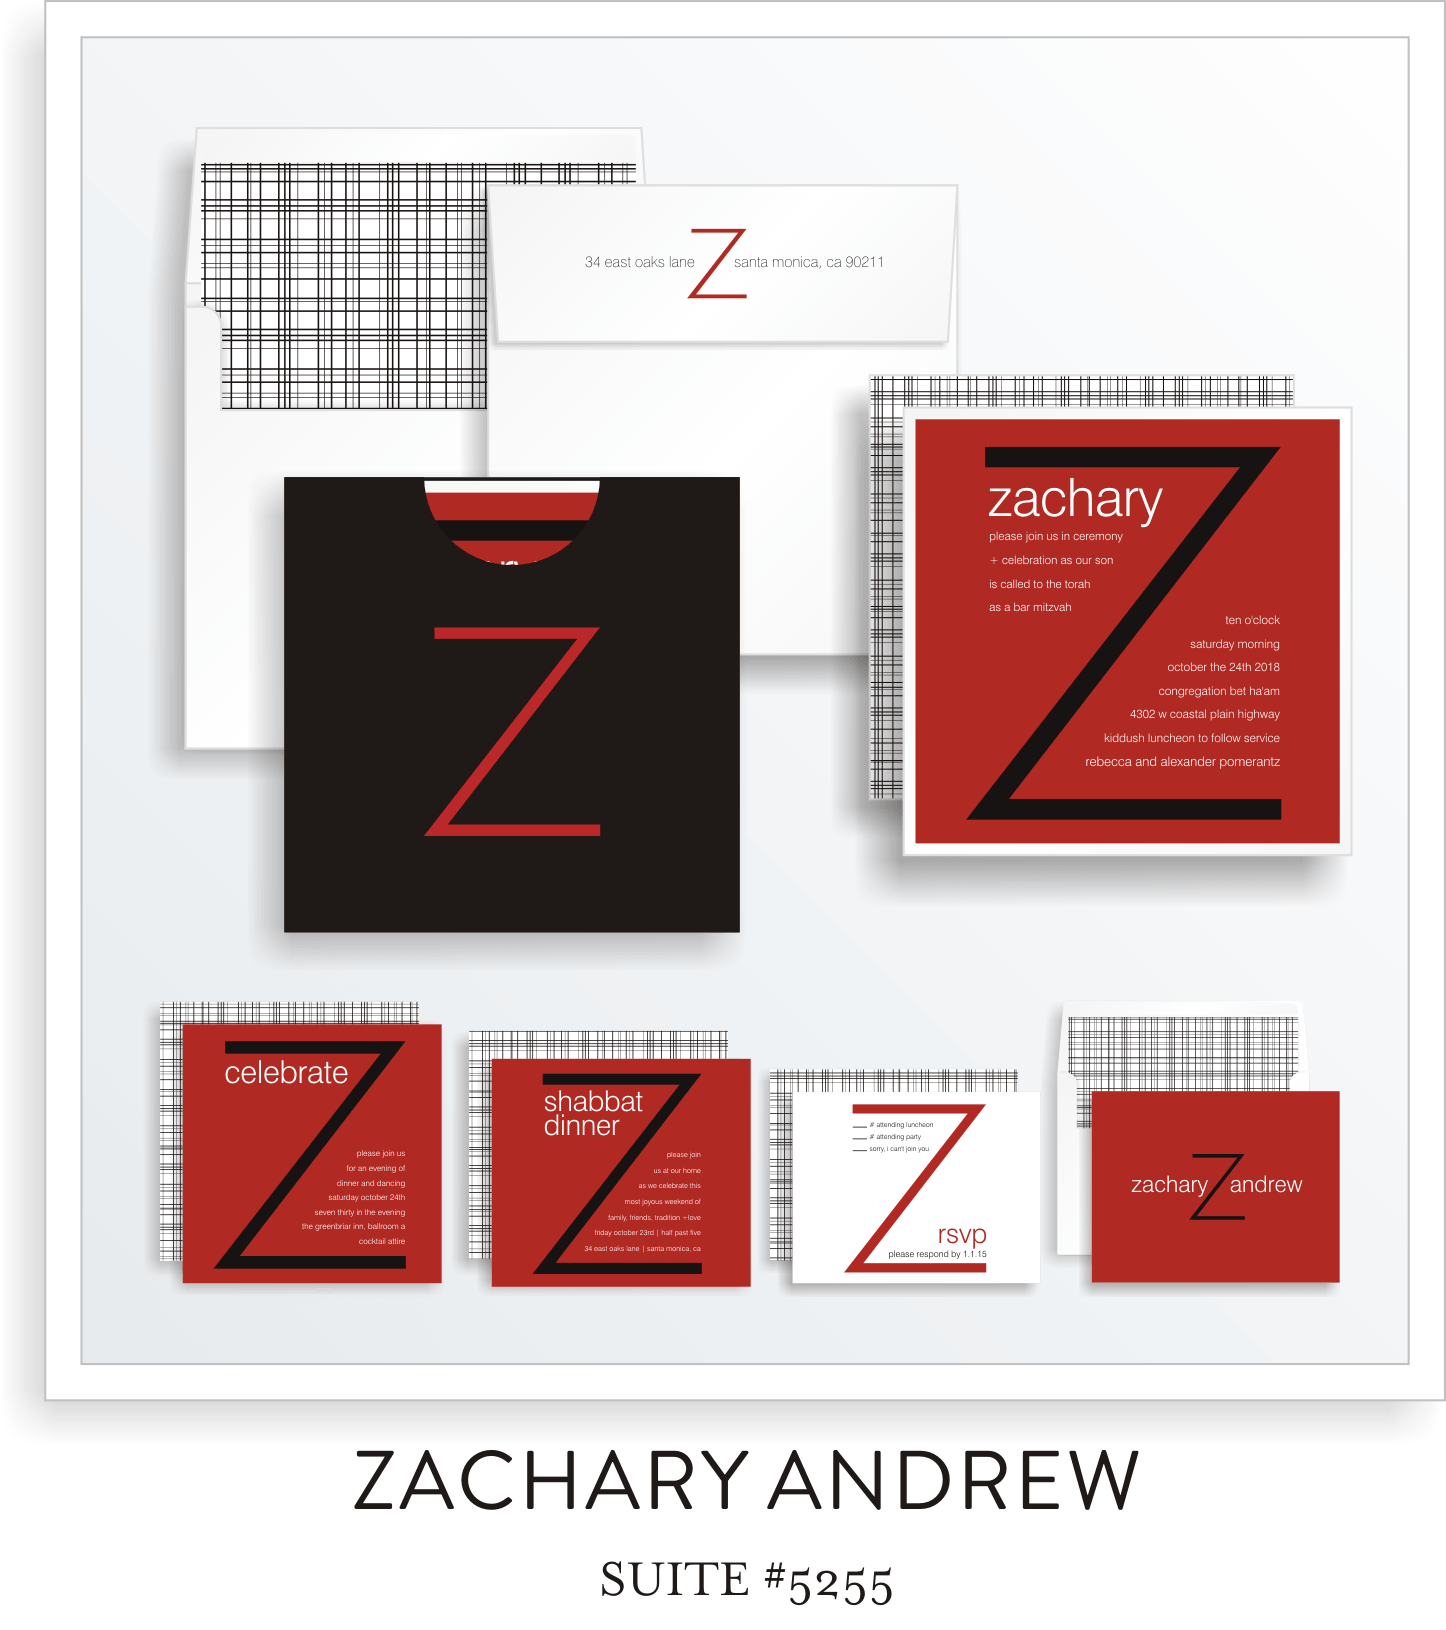 Copy of Bar Mitzvah Invitation Suite 5255 - Zachary Andrew